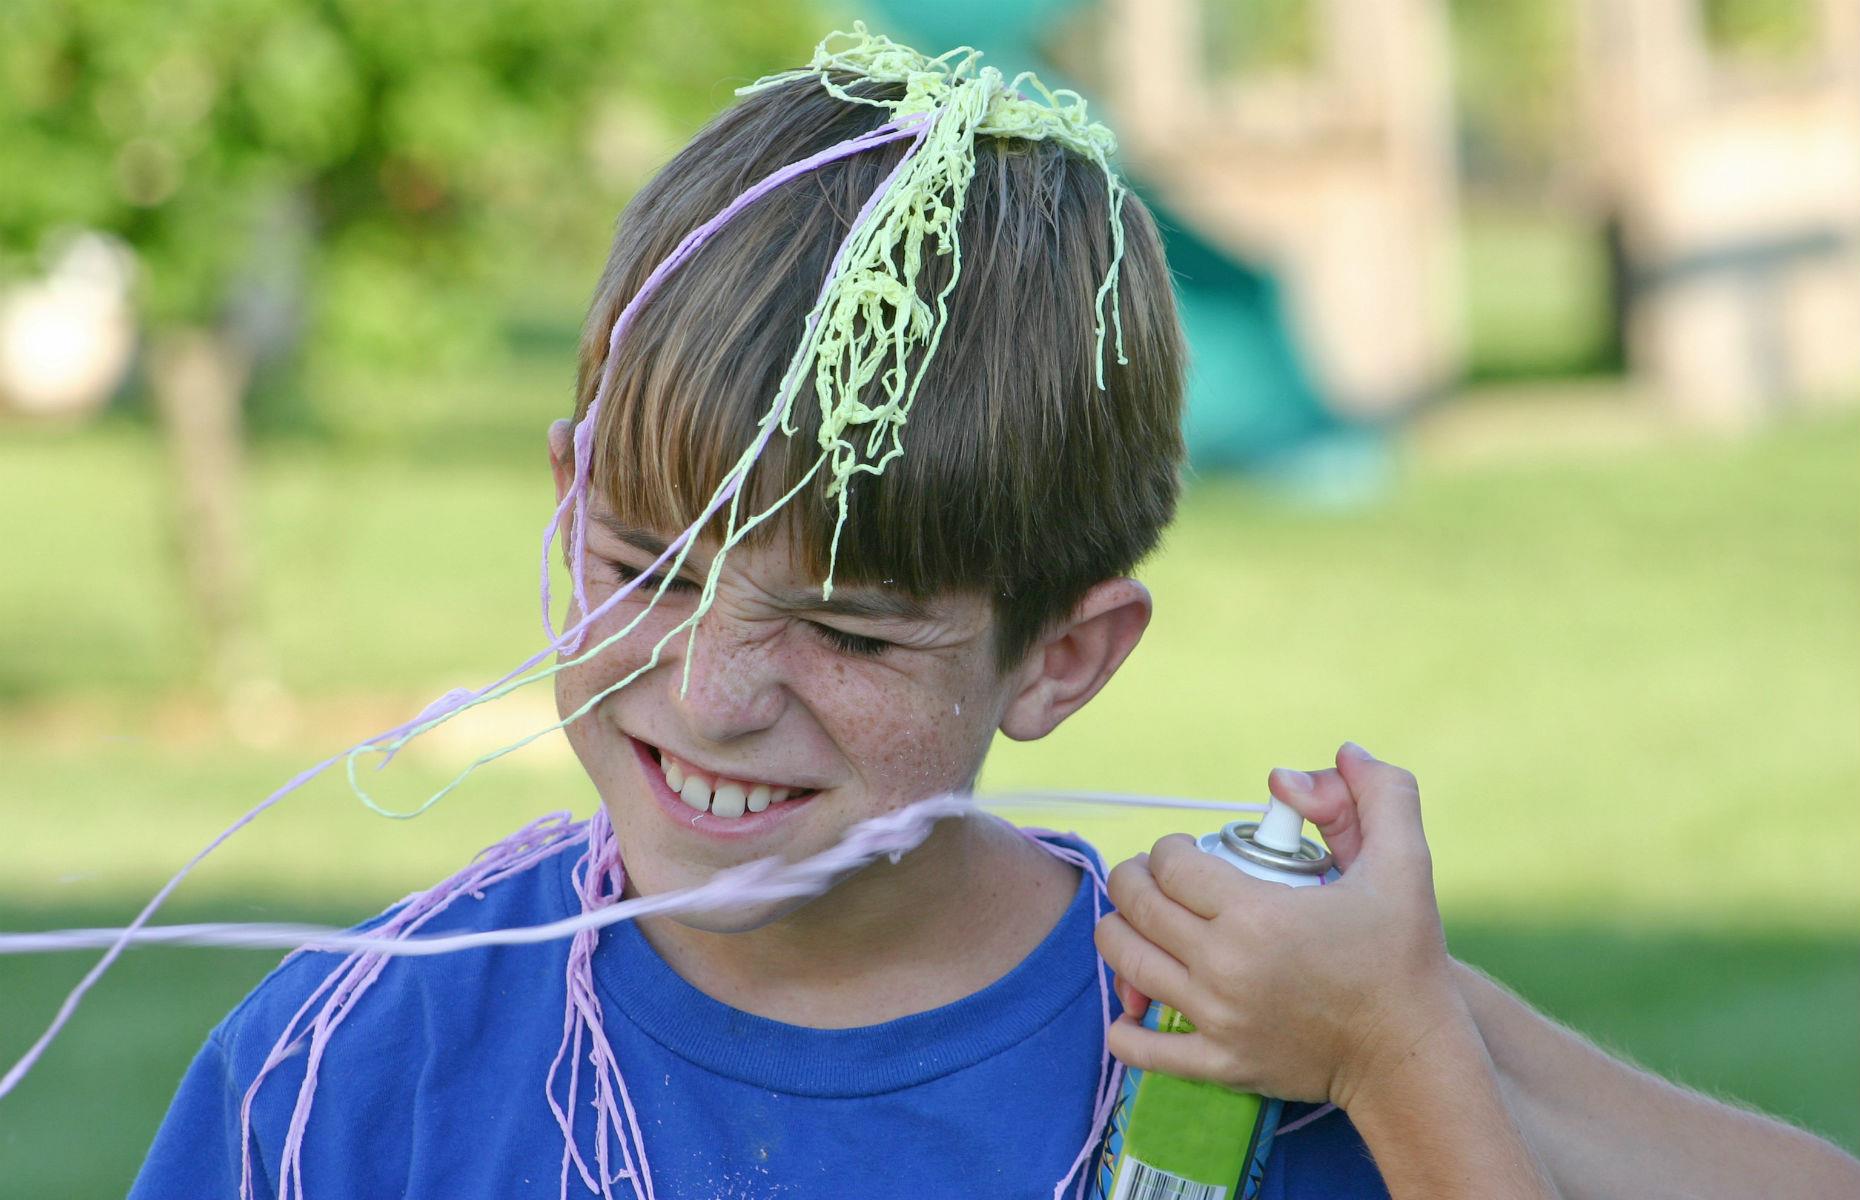 US: using silly string on Halloween – up to $1,000 (£718) fine